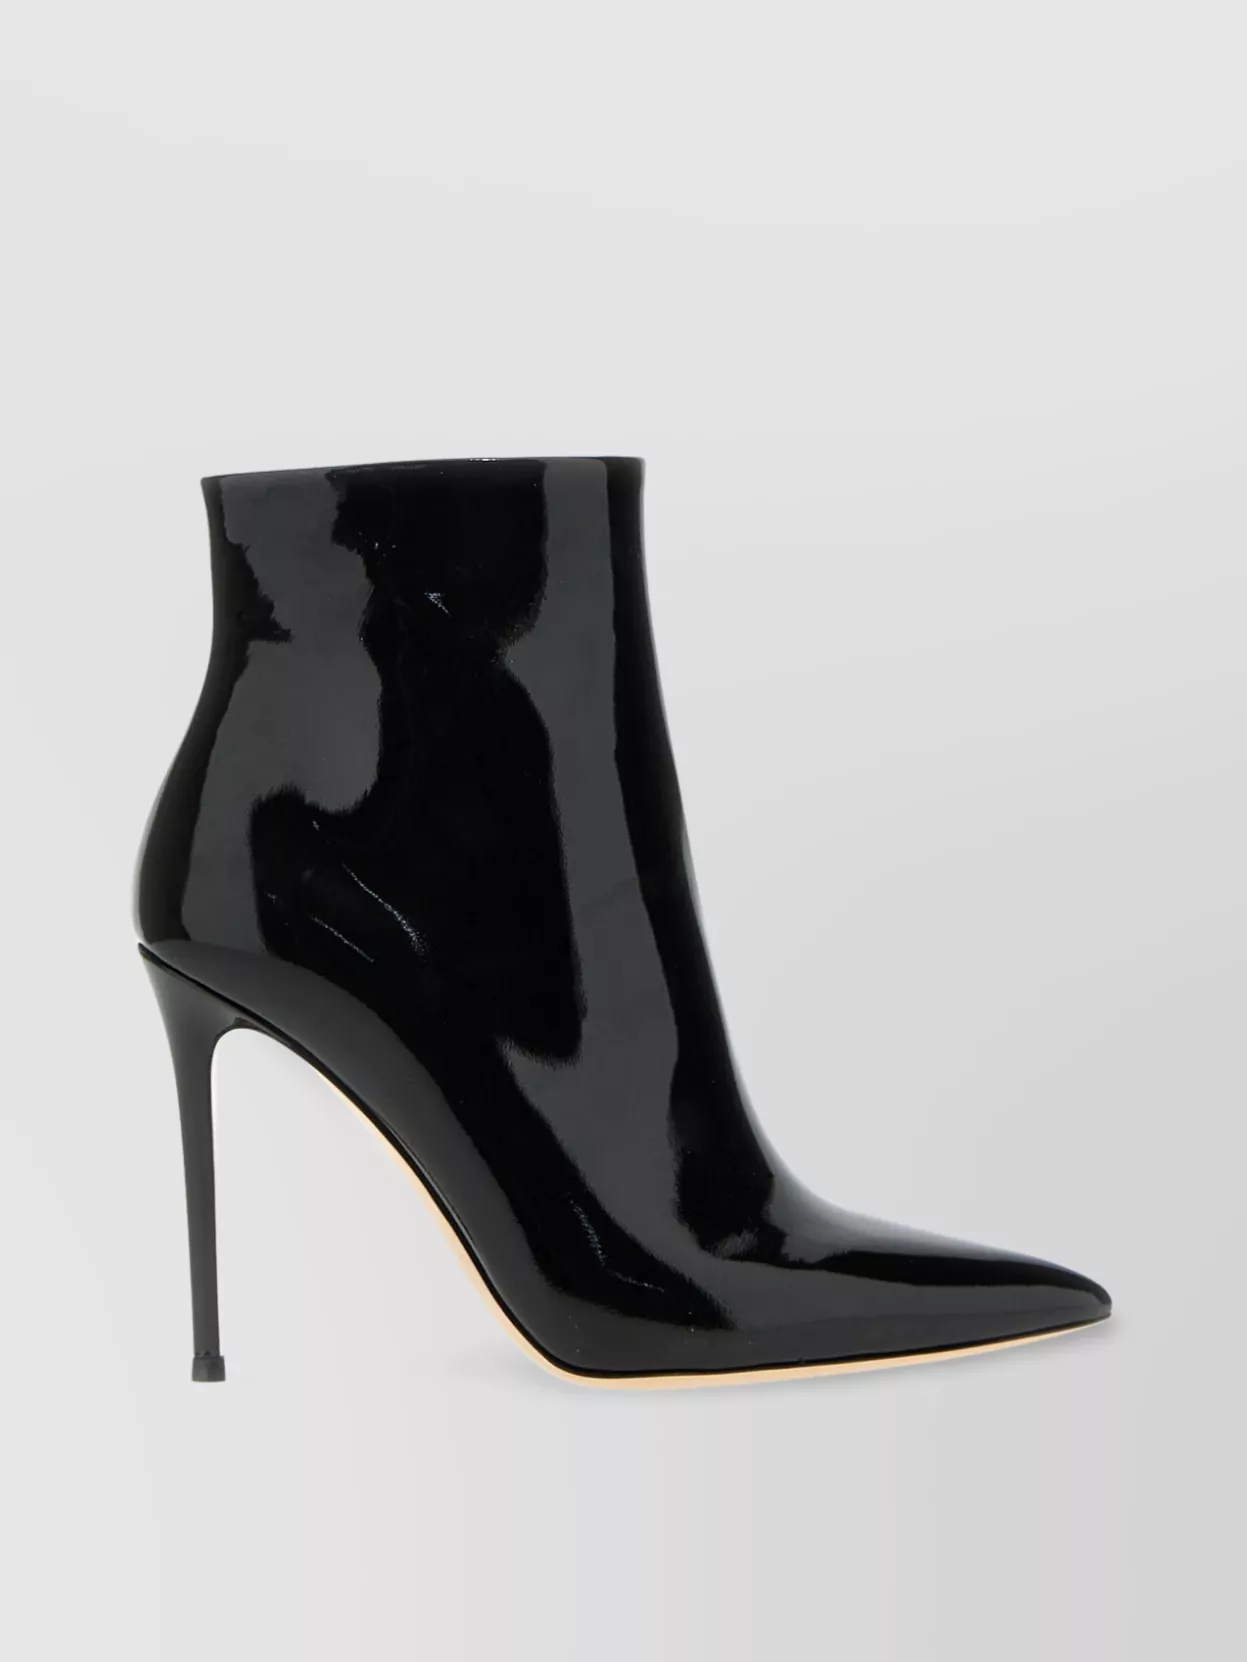 Gianvito Rossi Dunn Leather Ankle Boots In Black